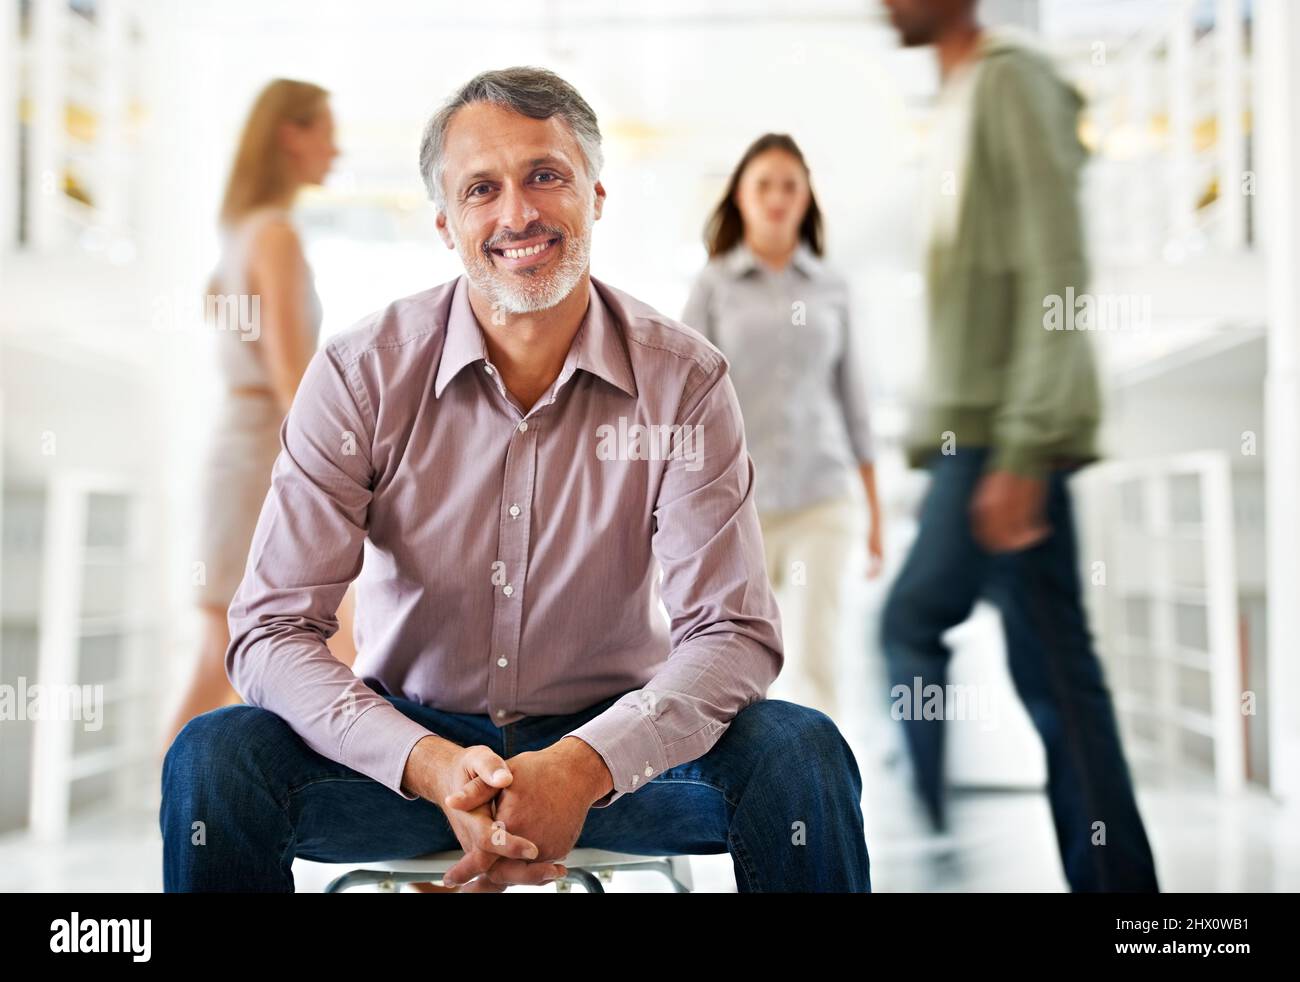 Level-headed leadership keeps him at the top. A handsome mature businessman sitting calmly as his colleagues stream by in haste - conceptual. Stock Photo